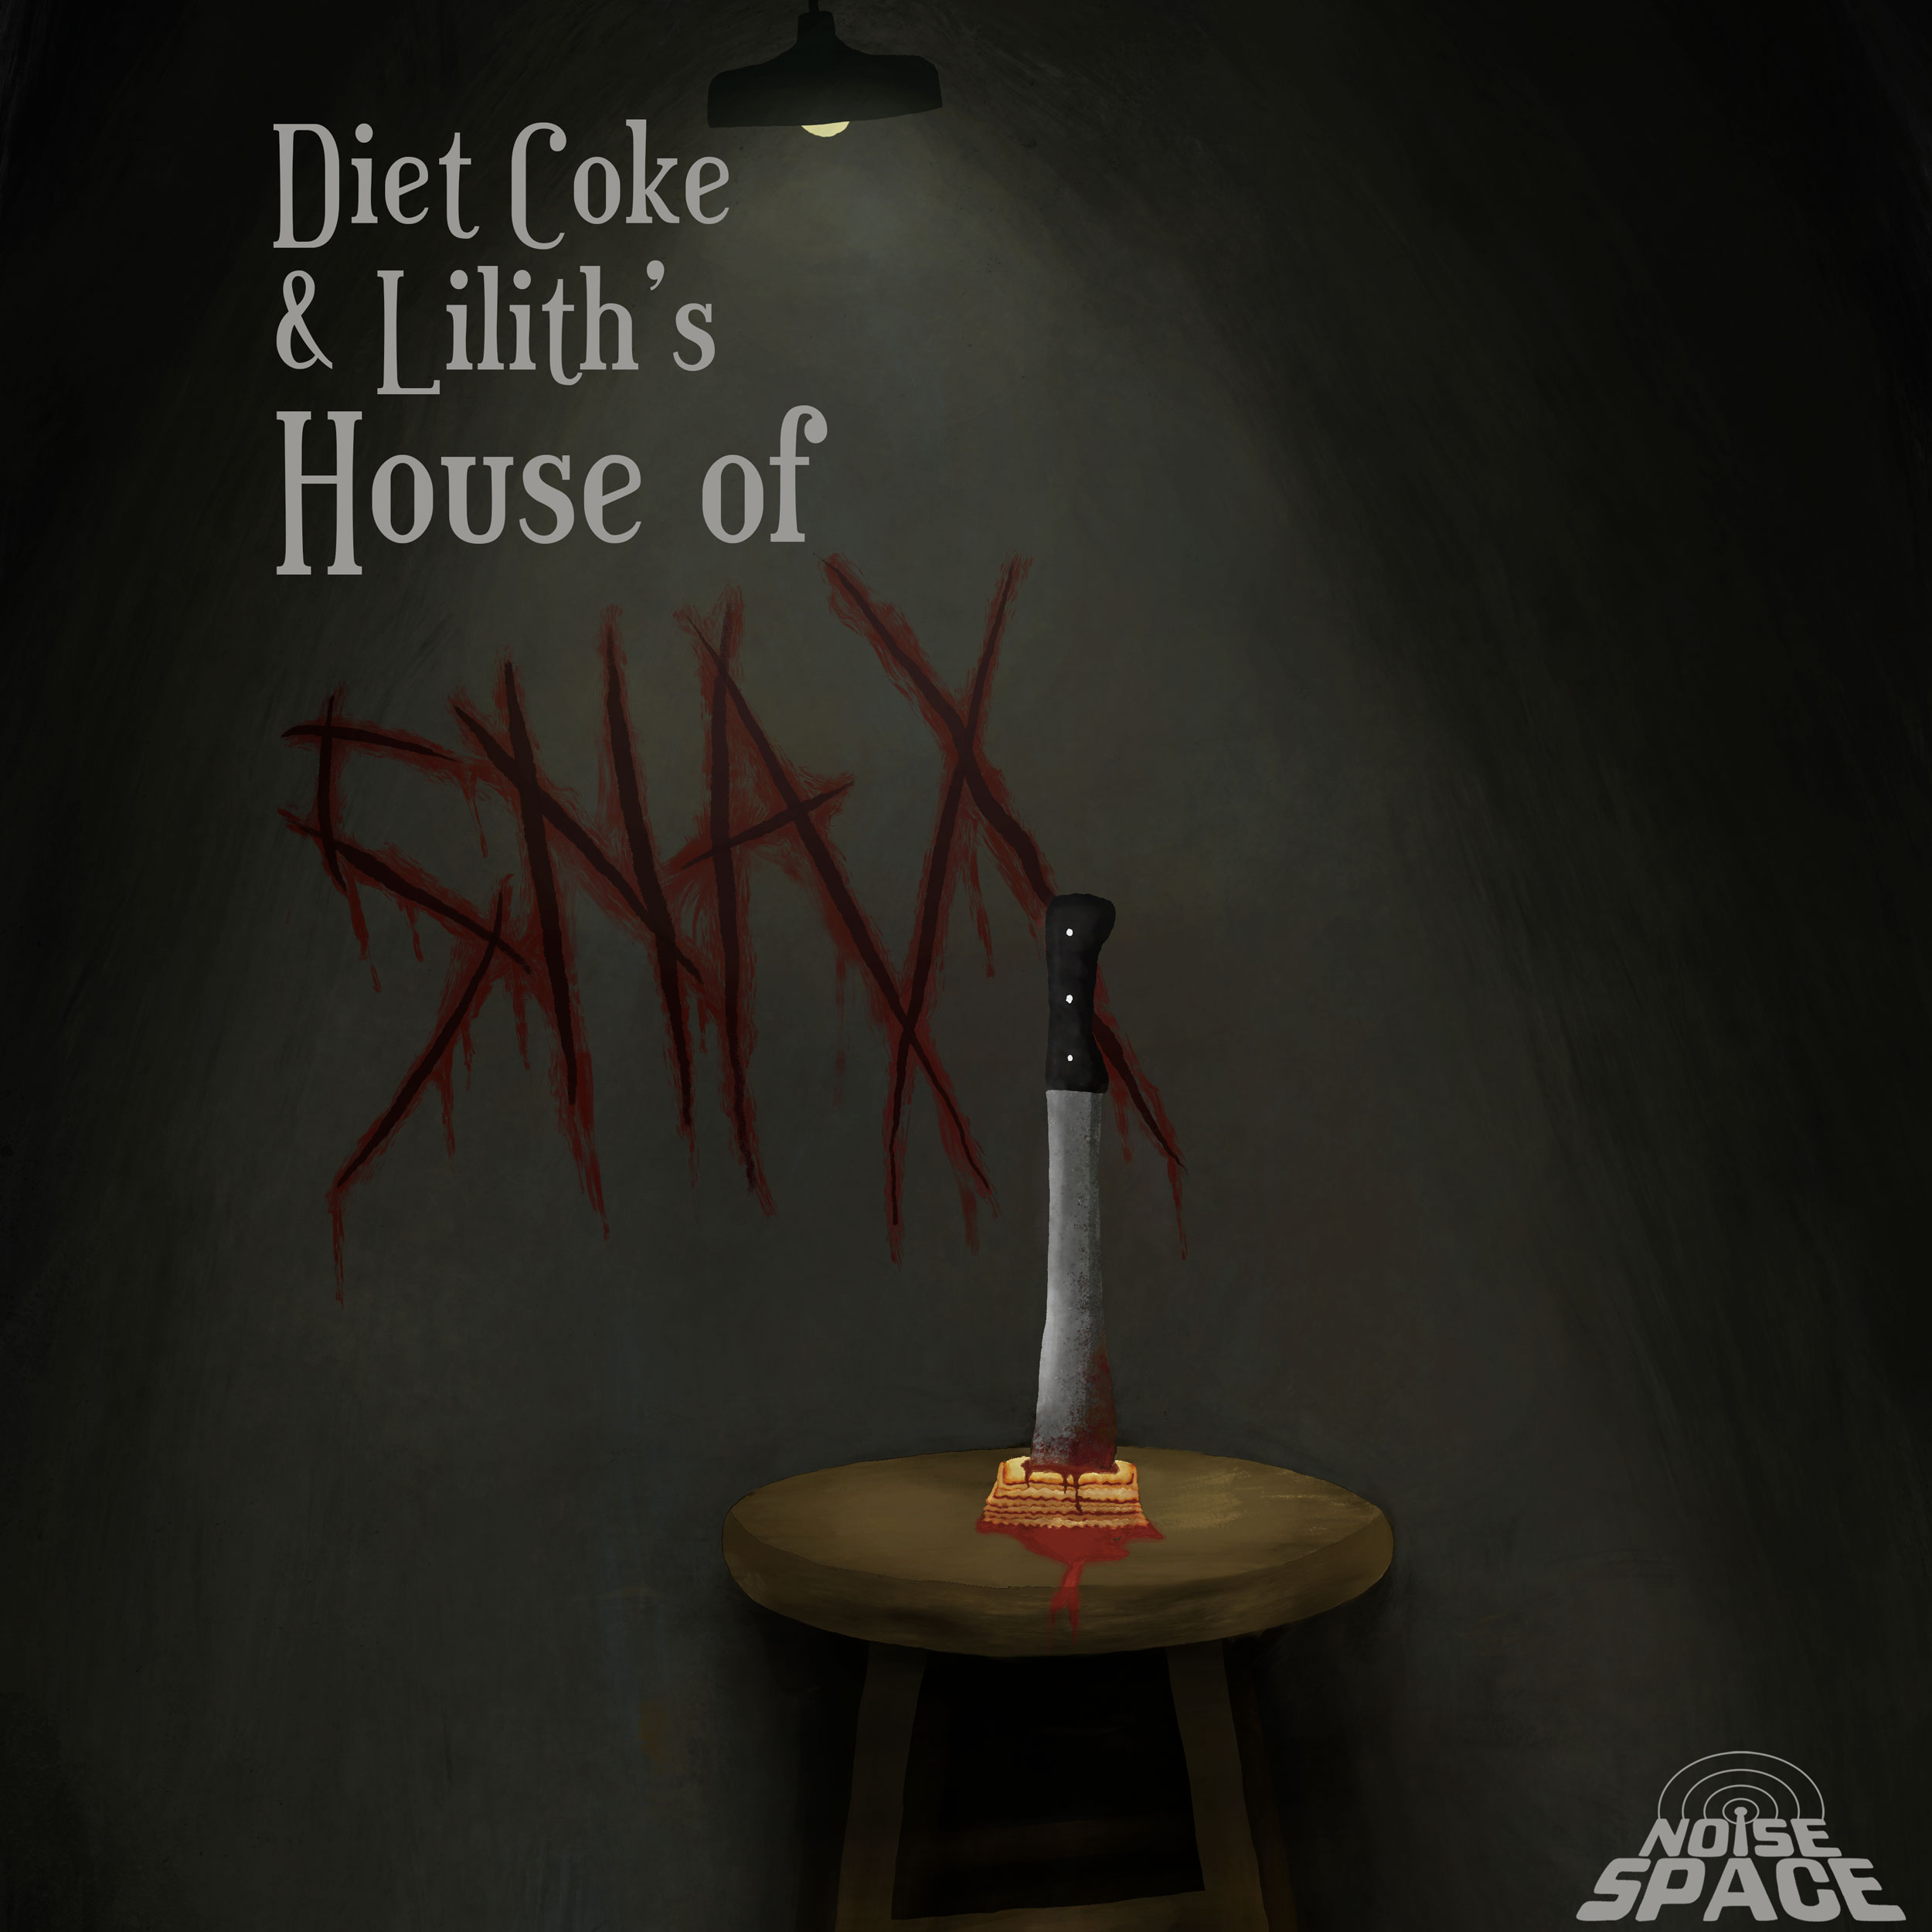 #16 – House of Snax 16.66 Don’t You Dare (Not) Be Sour